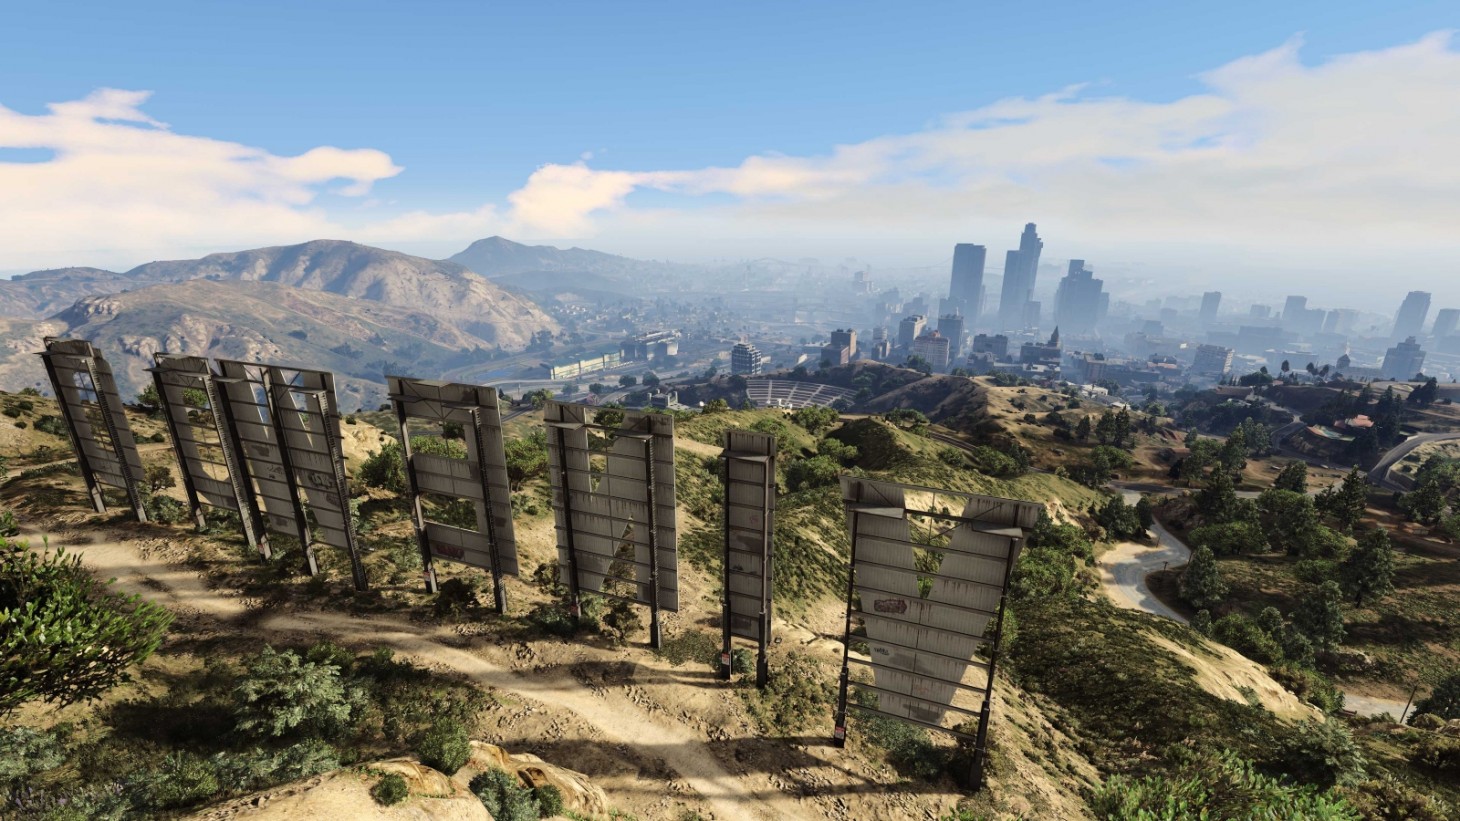 Is GTA 5 CROSSPLAY Available Cross Platforms For GTA Online : PS4